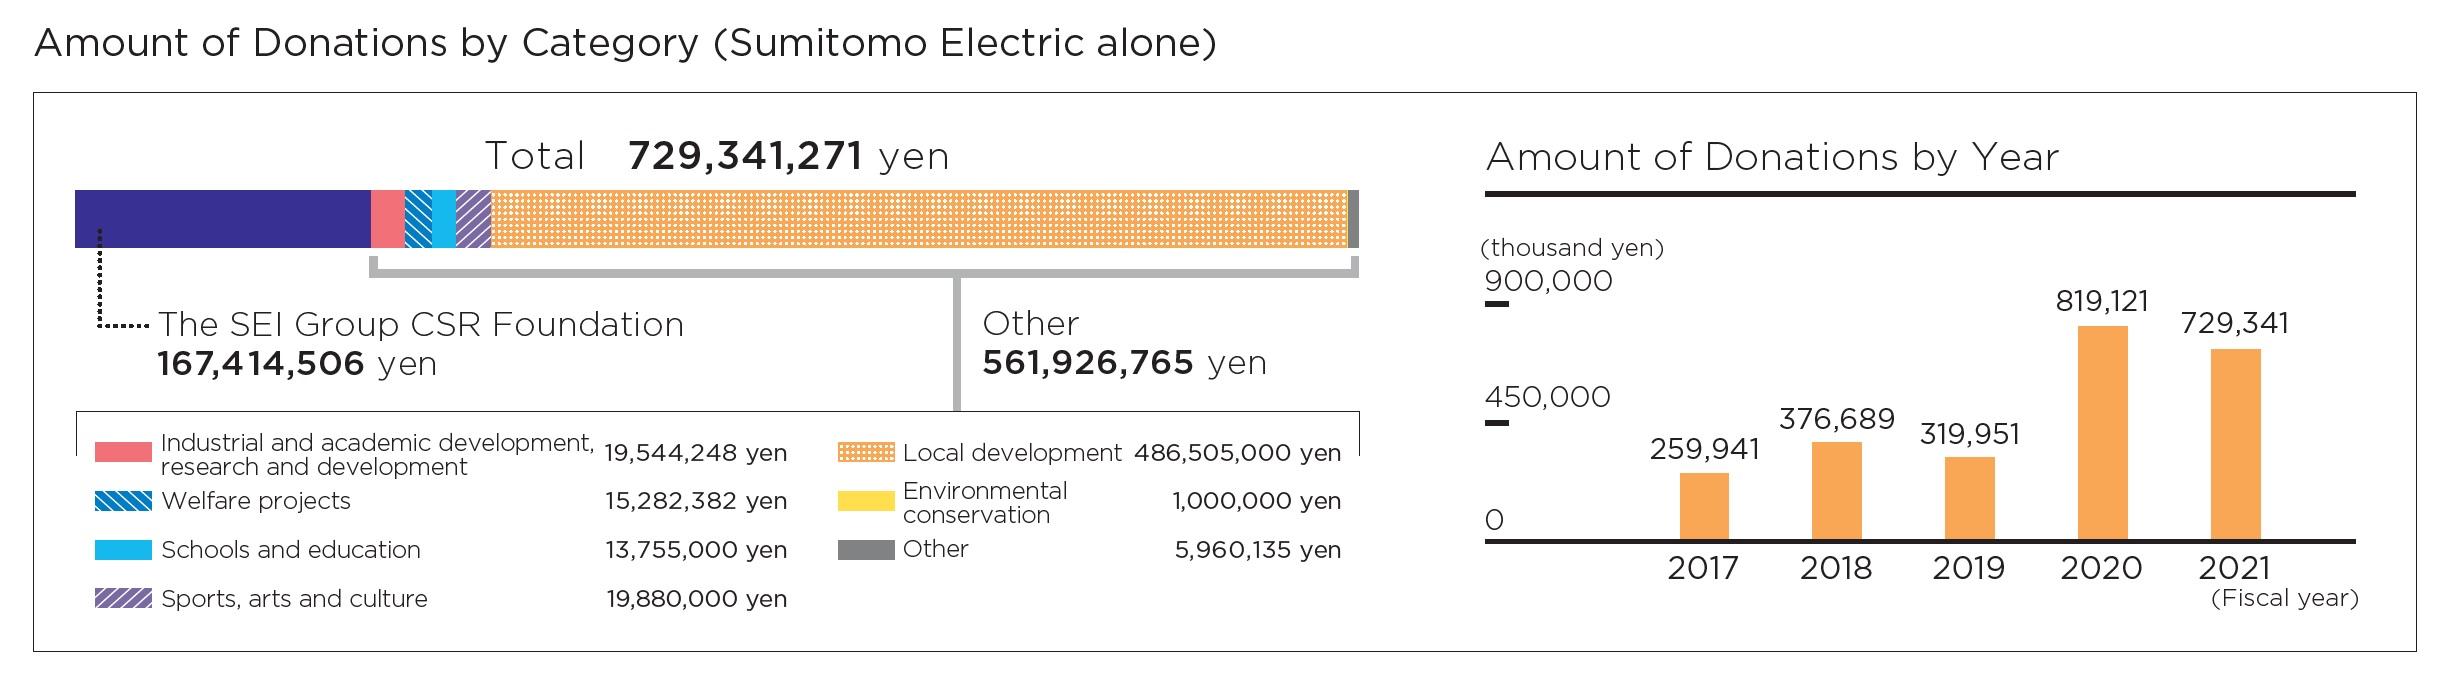 Amount of Donations by Category (Sumitomo Electric alone)